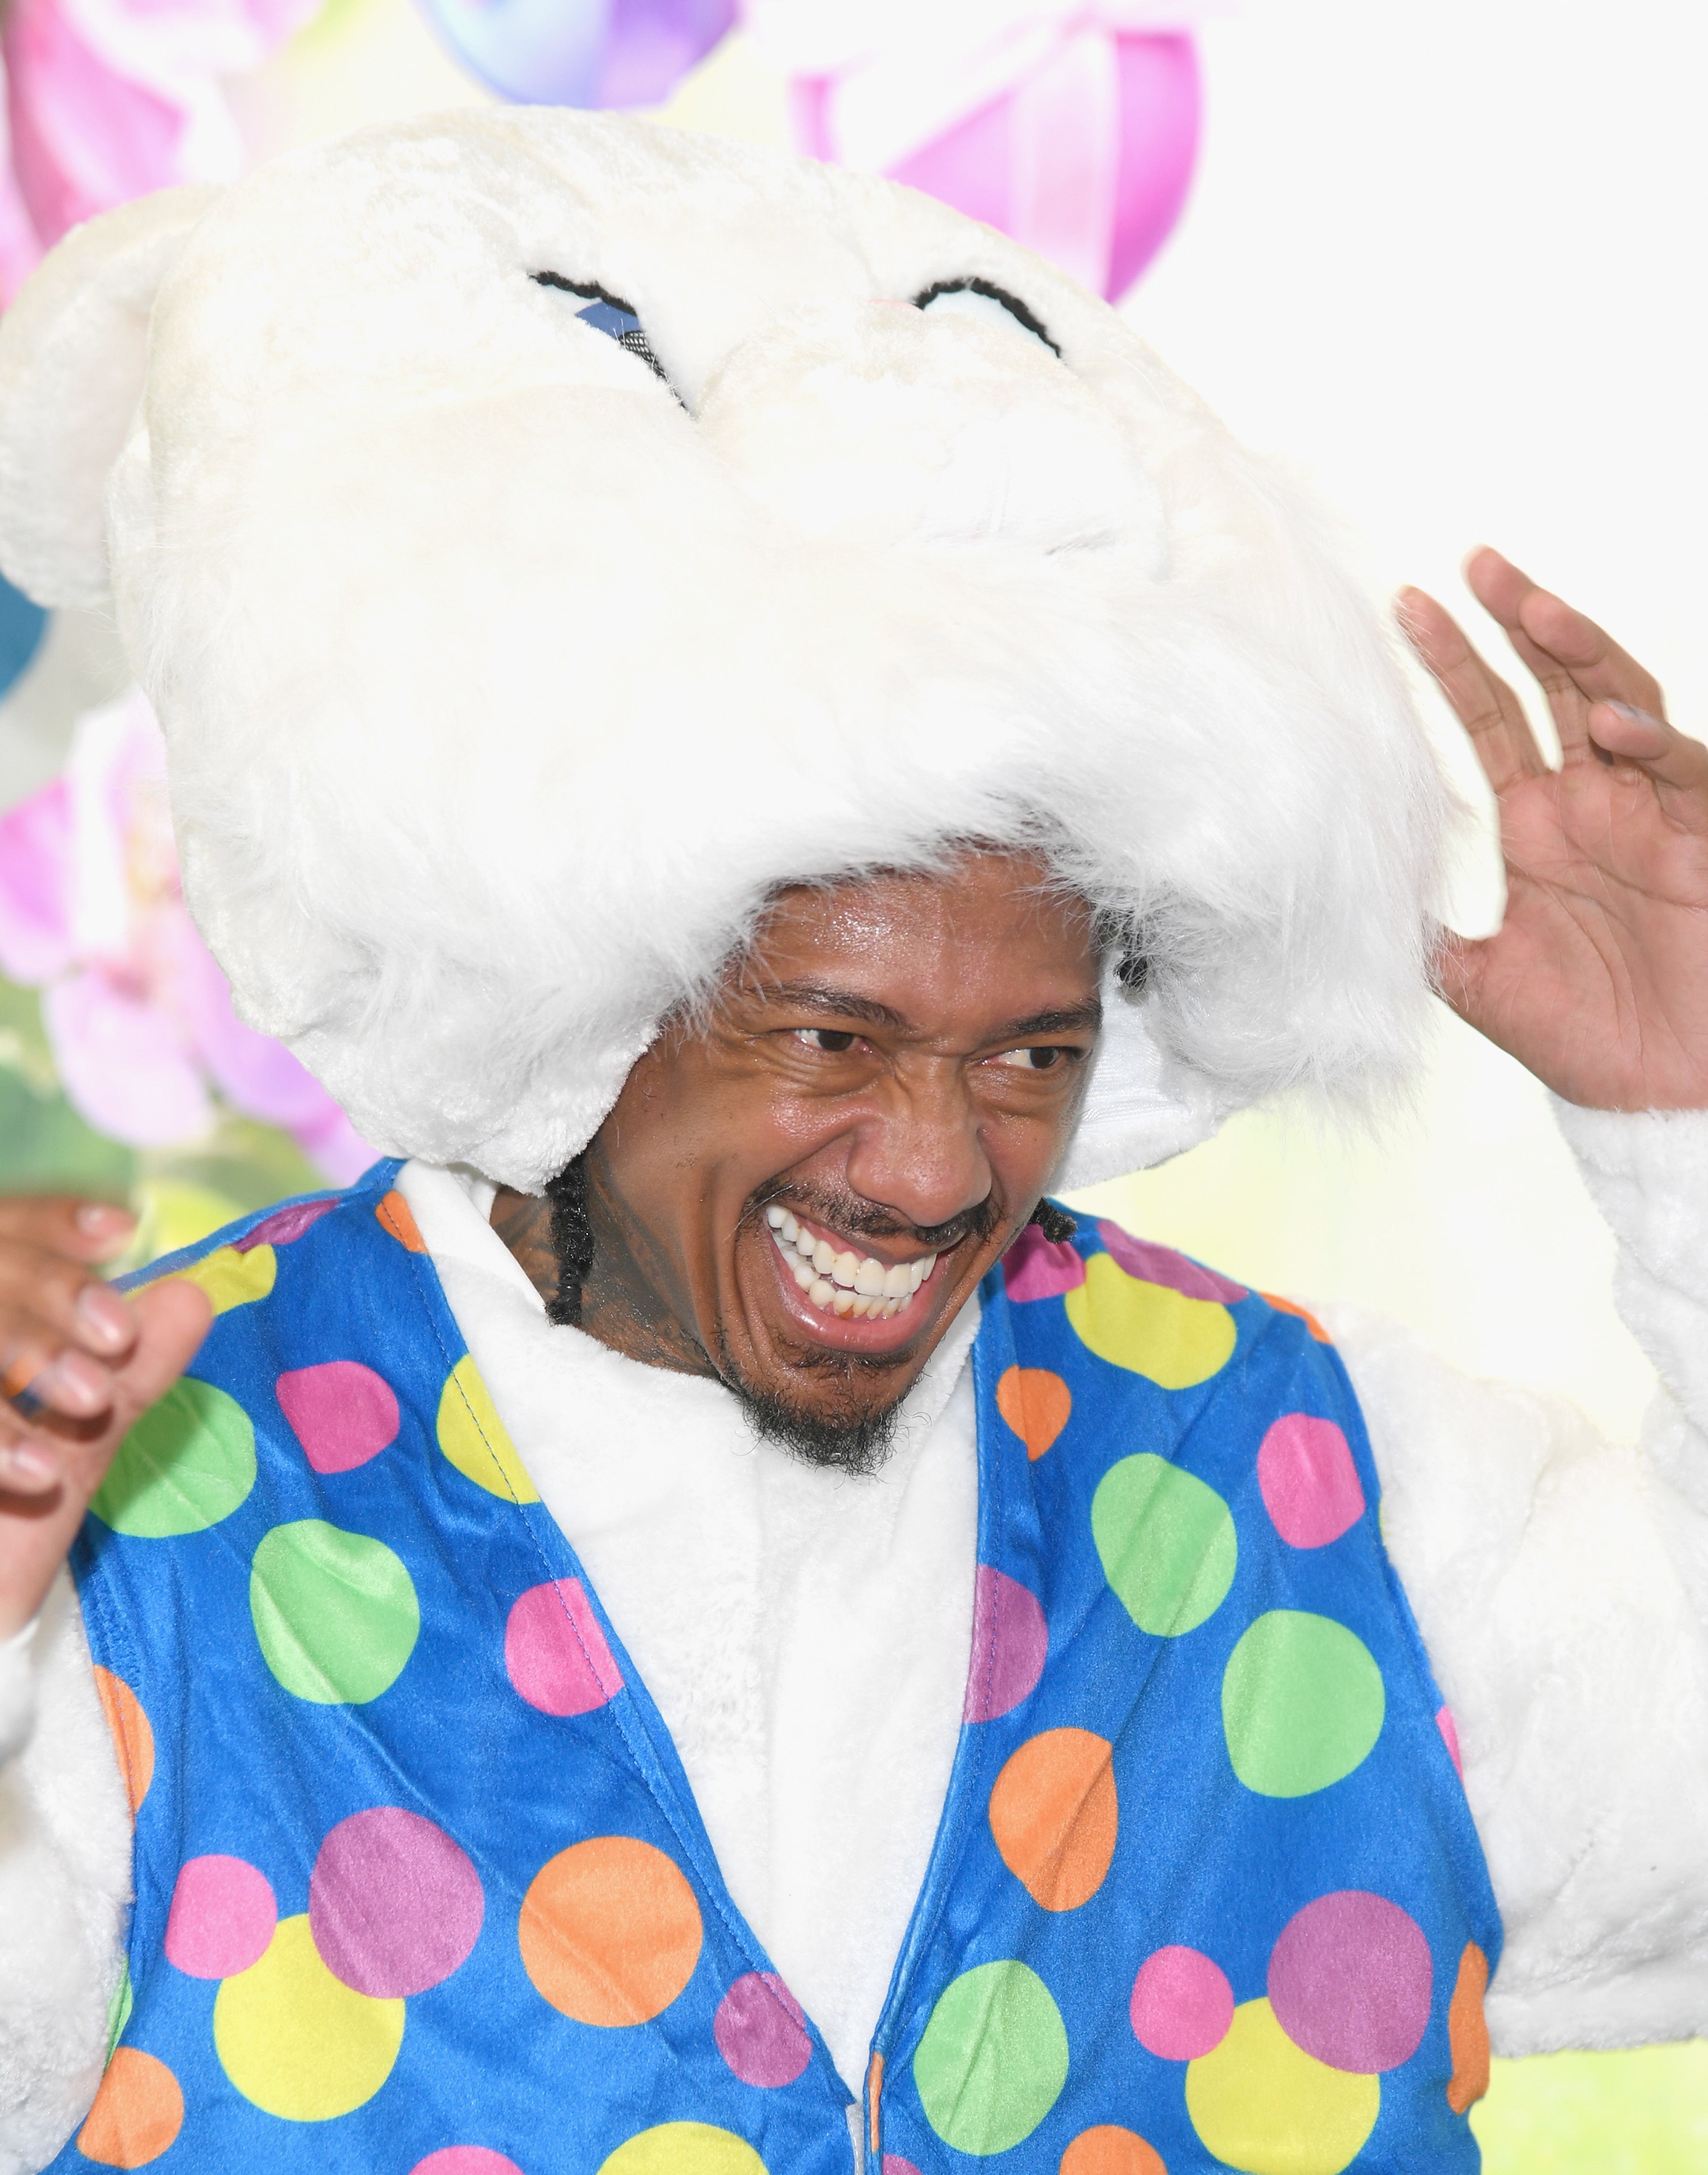 Nick Cannon dressed in a colorful polka dot vest and a large fluffy bunny hat, smiling and holding the hat